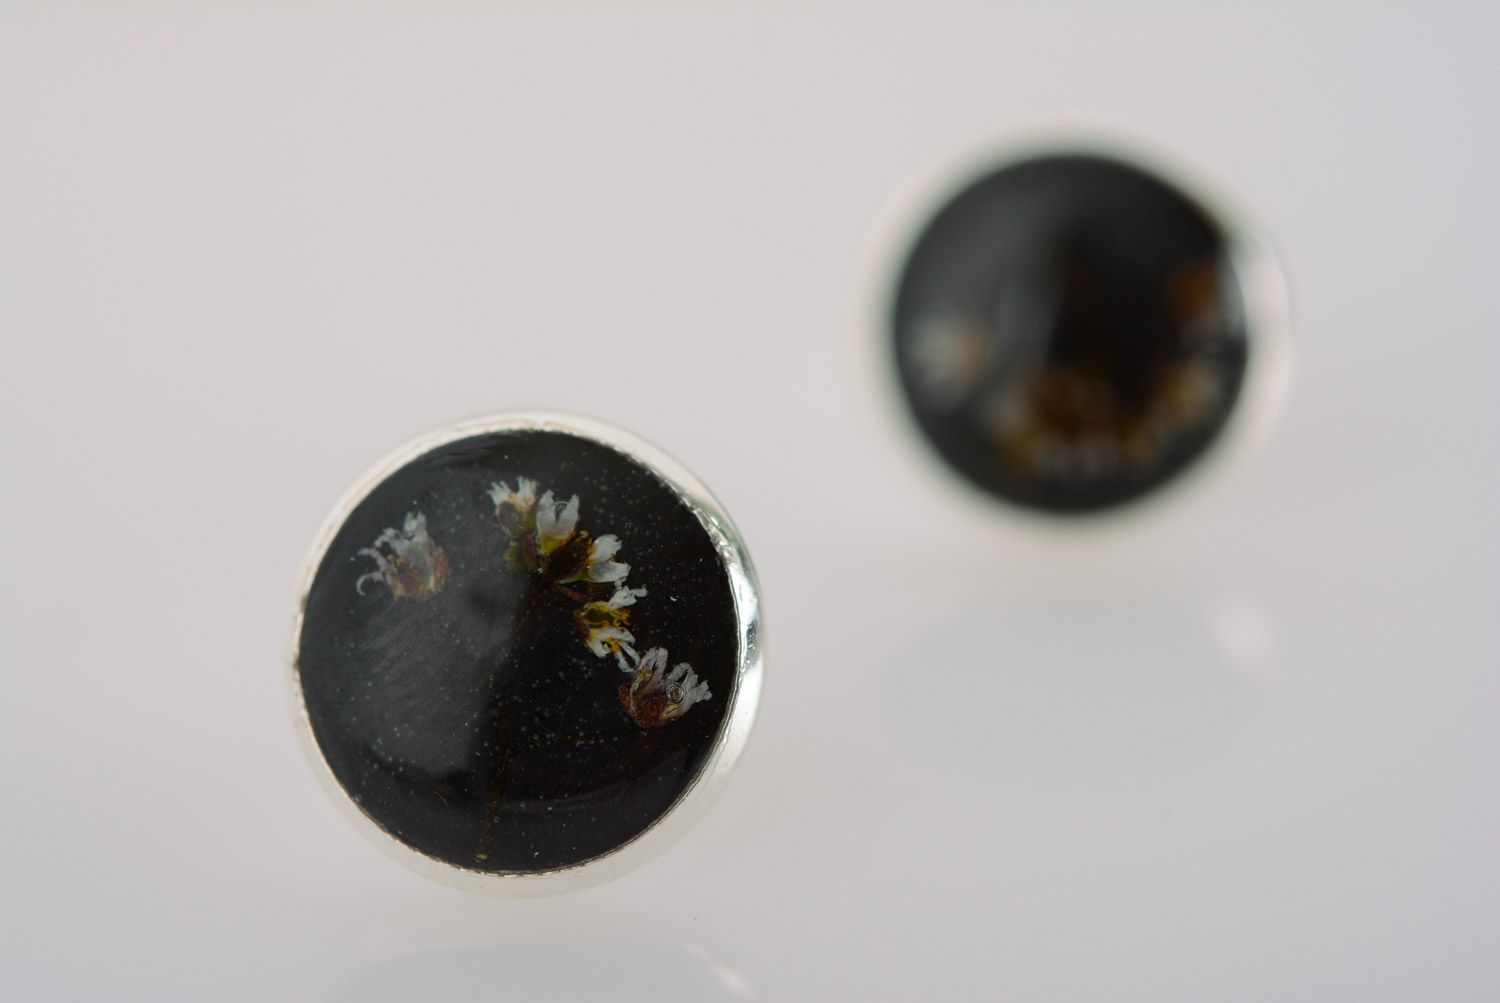 Homemade small black stud earrings with dried flower embedded in epoxy resin photo 2